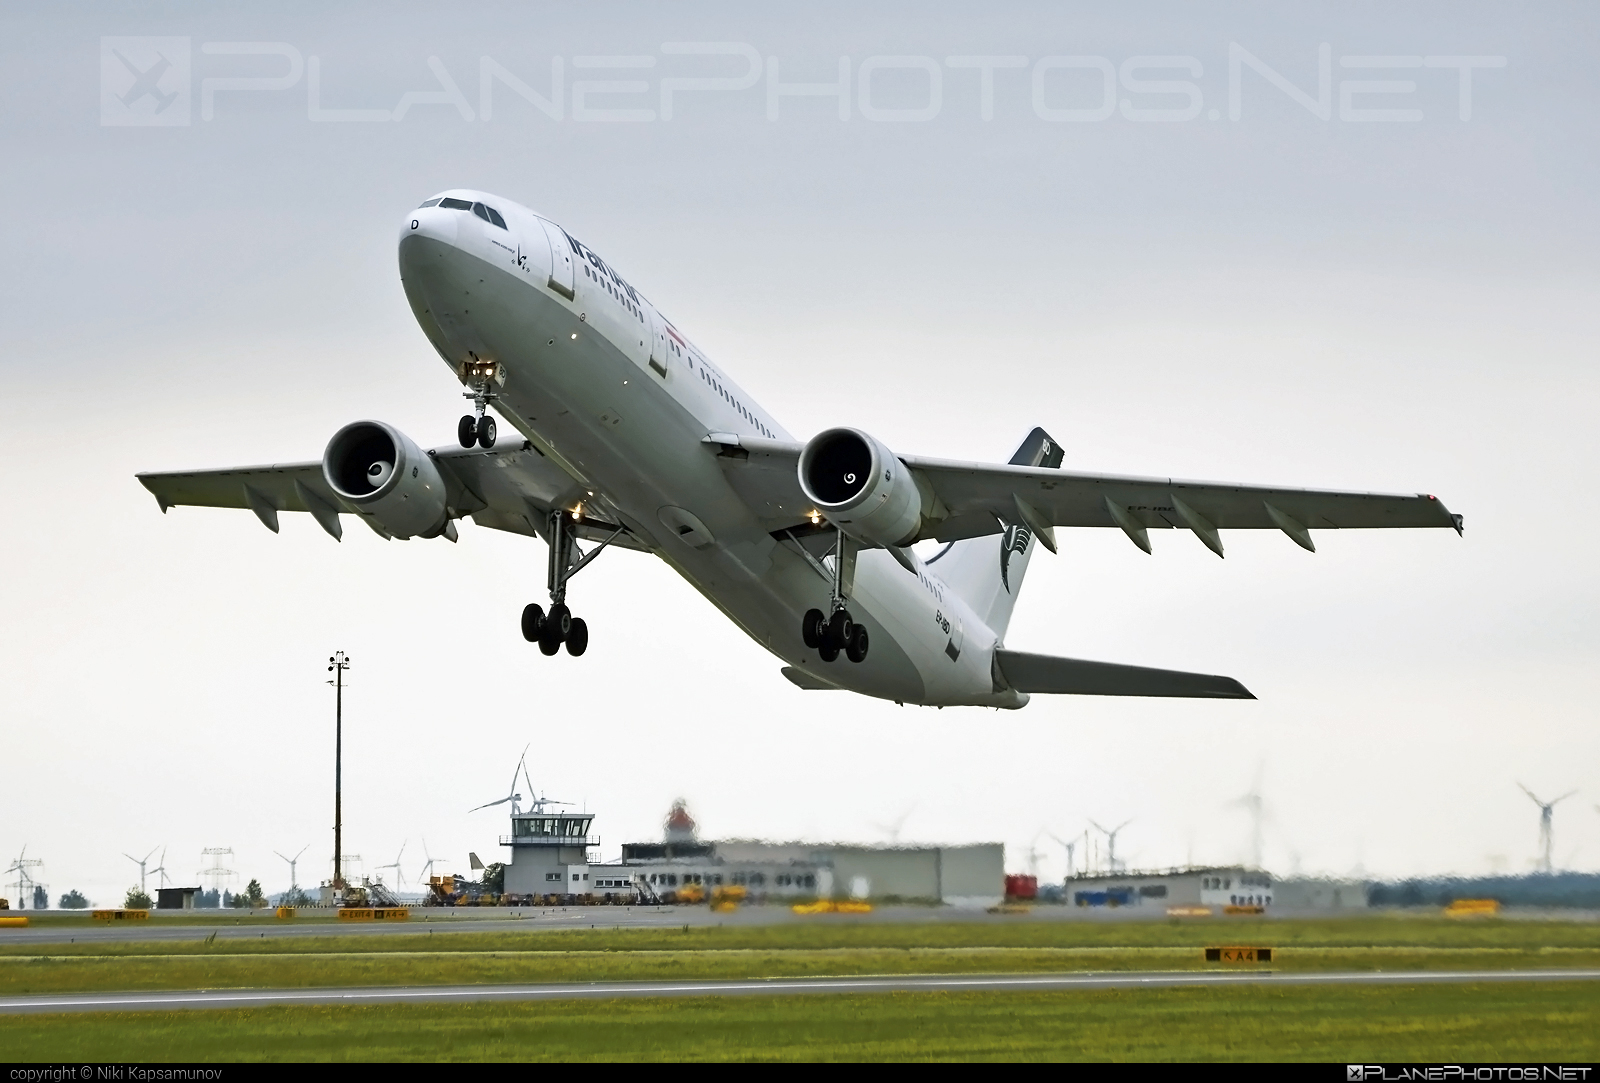 Airbus A300B4-605R - EP-IBD operated by Iran Air #a300 #airbus